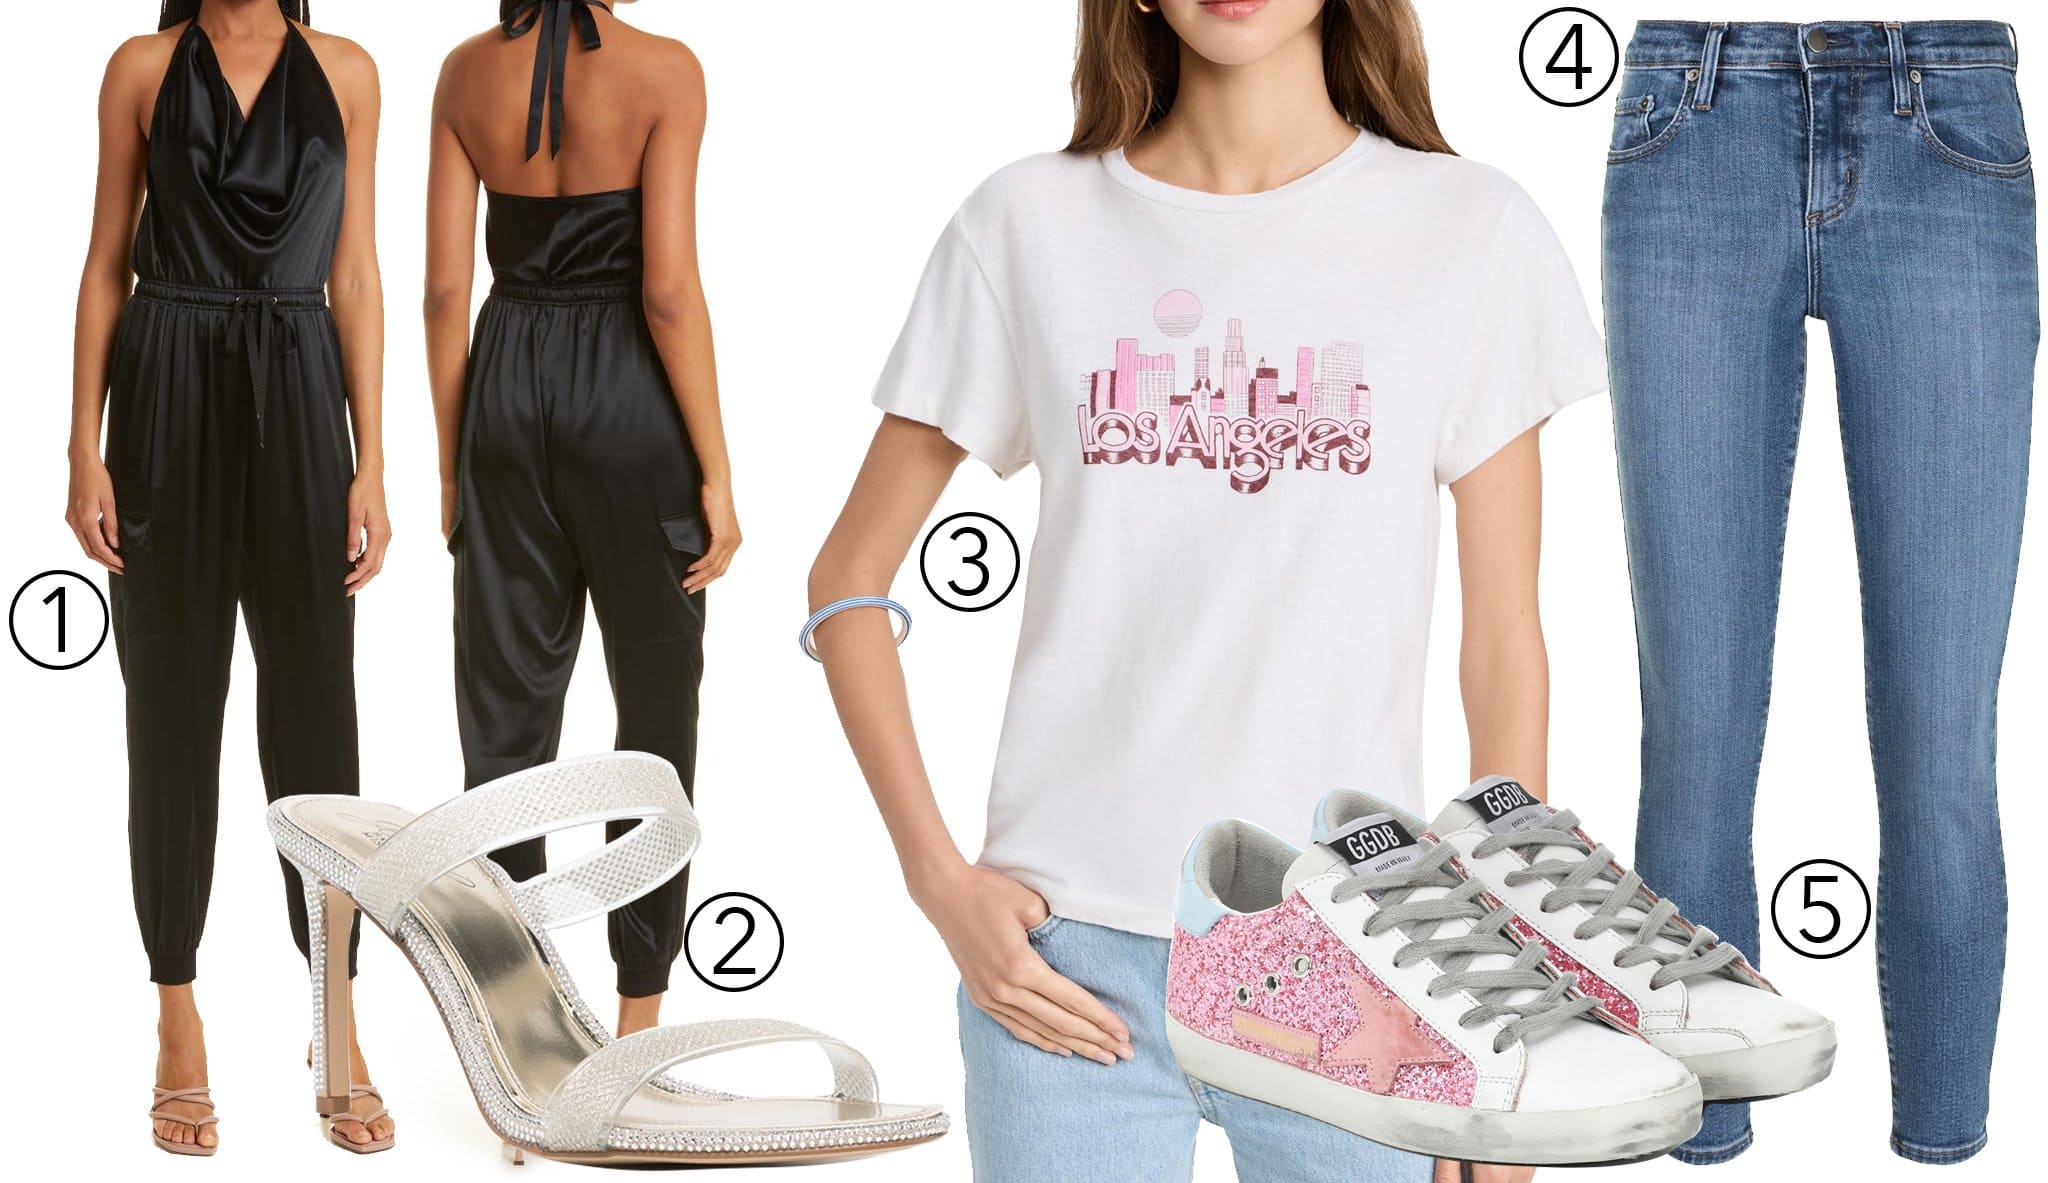 1. Cami NYC Jackie Halter Neck Stretch Silk Jumpsuit; 2. Badgley Mischka Lovely Stiletto Mules; 3. Re/Done Los Angeles Tee; 4. Nobody Denim Geo Skinny Ankle Jeans; 5. Golden Goose Superstar Leather Sneakers